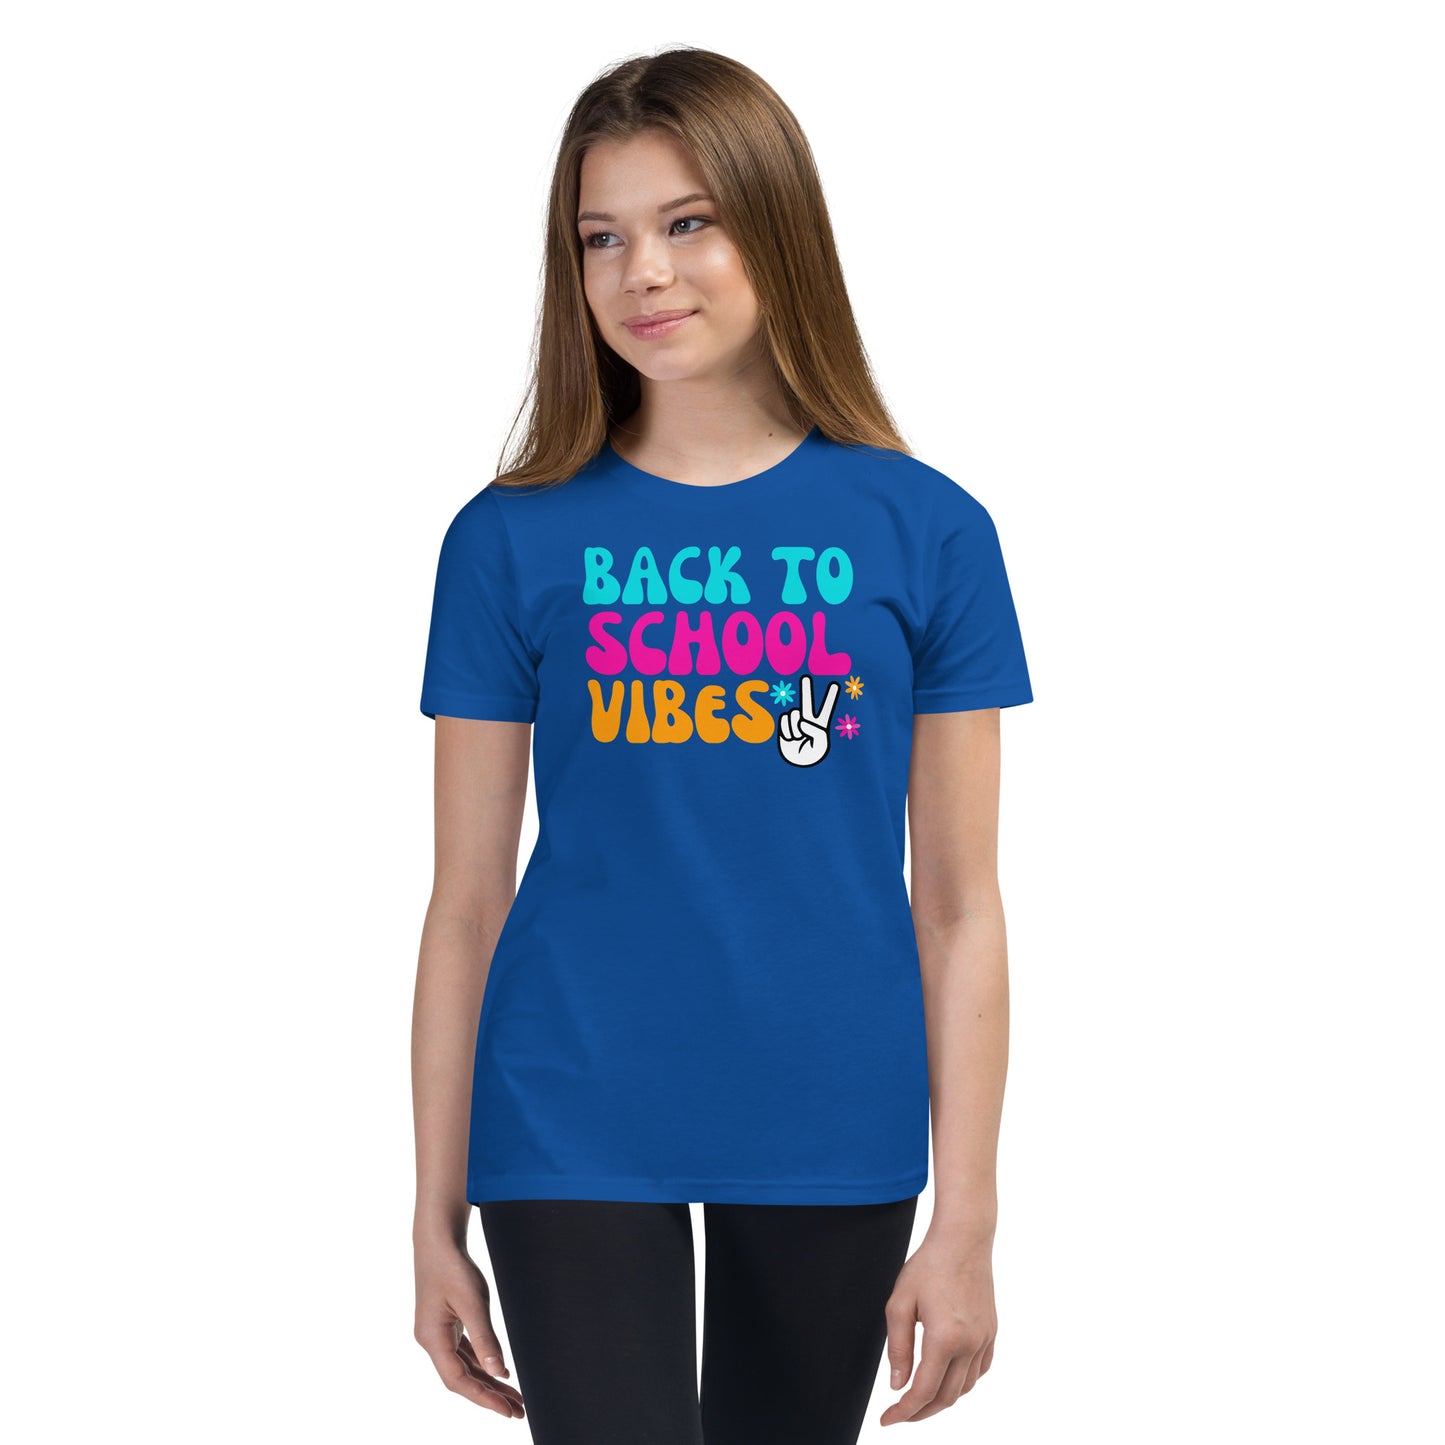 Back to school vibes Youth T-Shirt